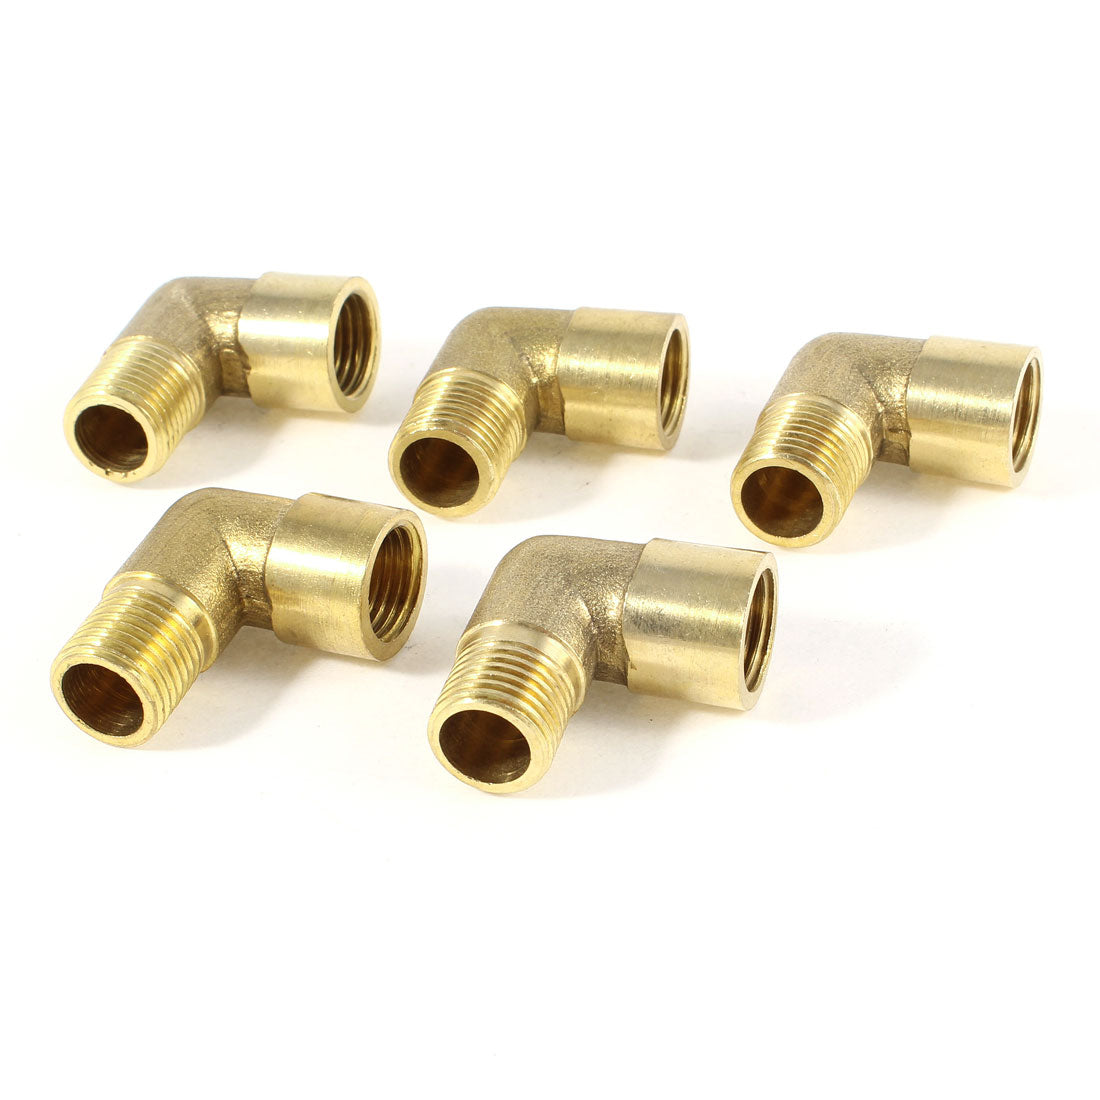 uxcell Uxcell 5Pcs Brass 90 Degree Elbow 1/4"PT Male to Female Thread Pipe Fitting Coupling